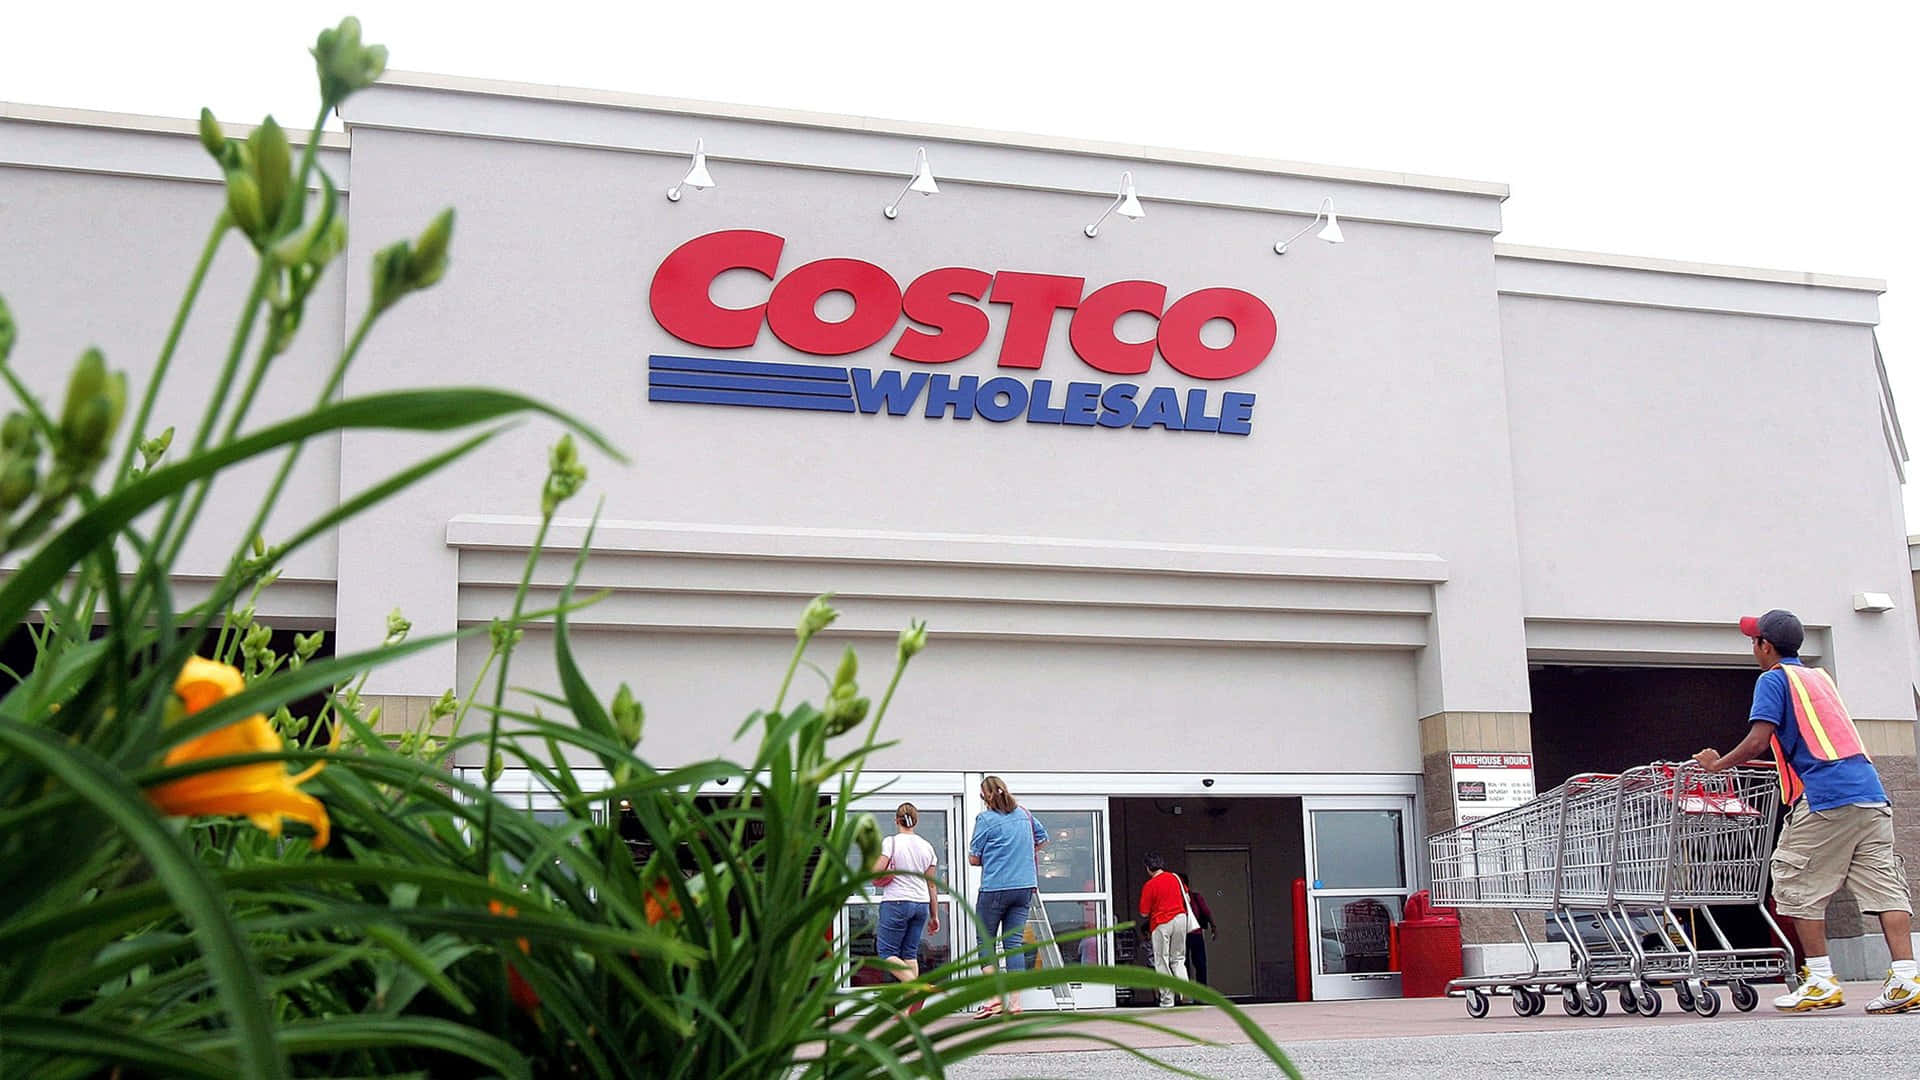 Costco Wholesalers Is A Chain Of Discount Stores